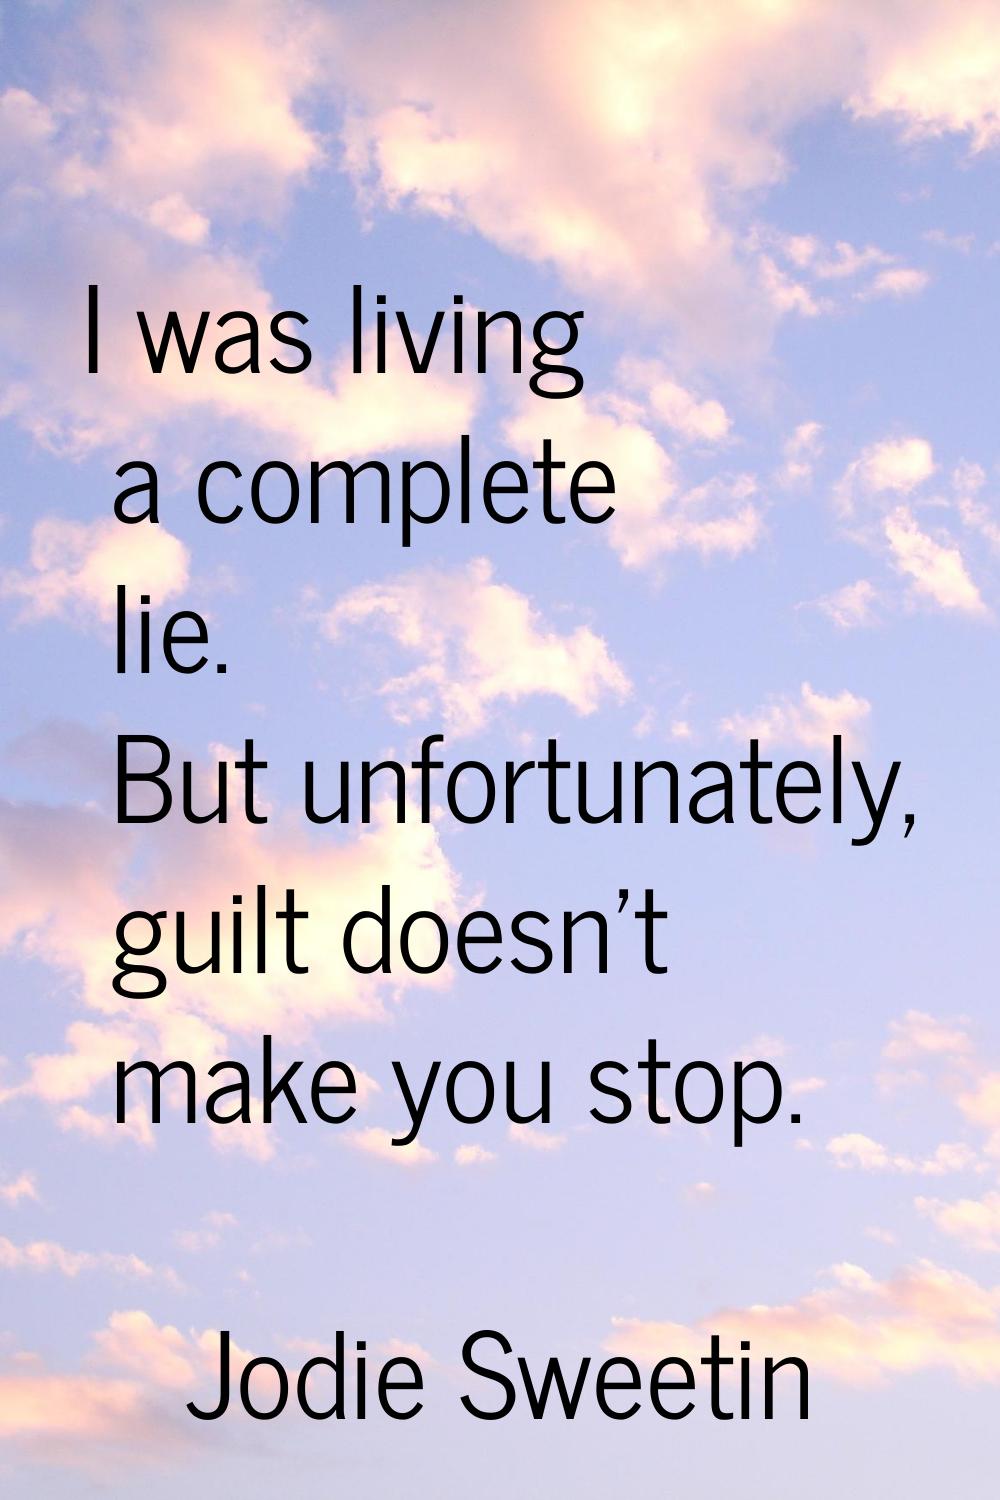 I was living a complete lie. But unfortunately, guilt doesn't make you stop.